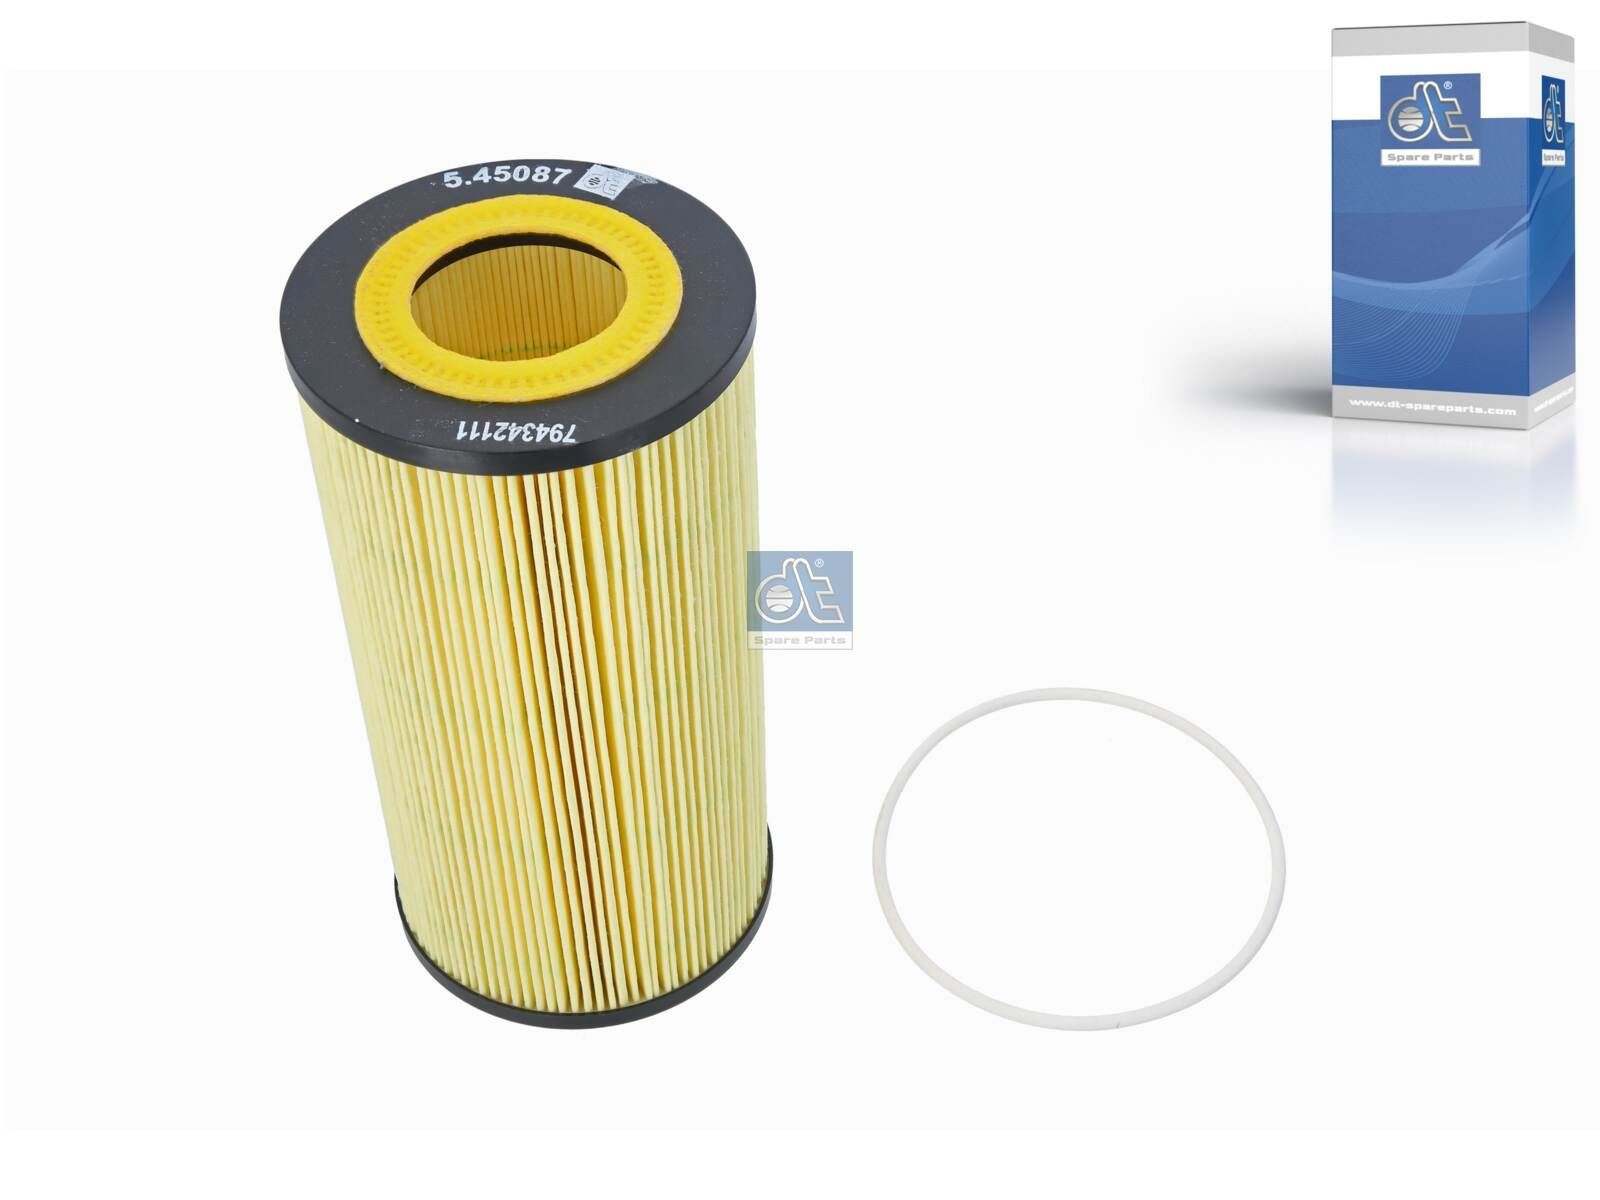 HU 12 103 x DT Spare Parts 5.45087 Oil filter 1532479